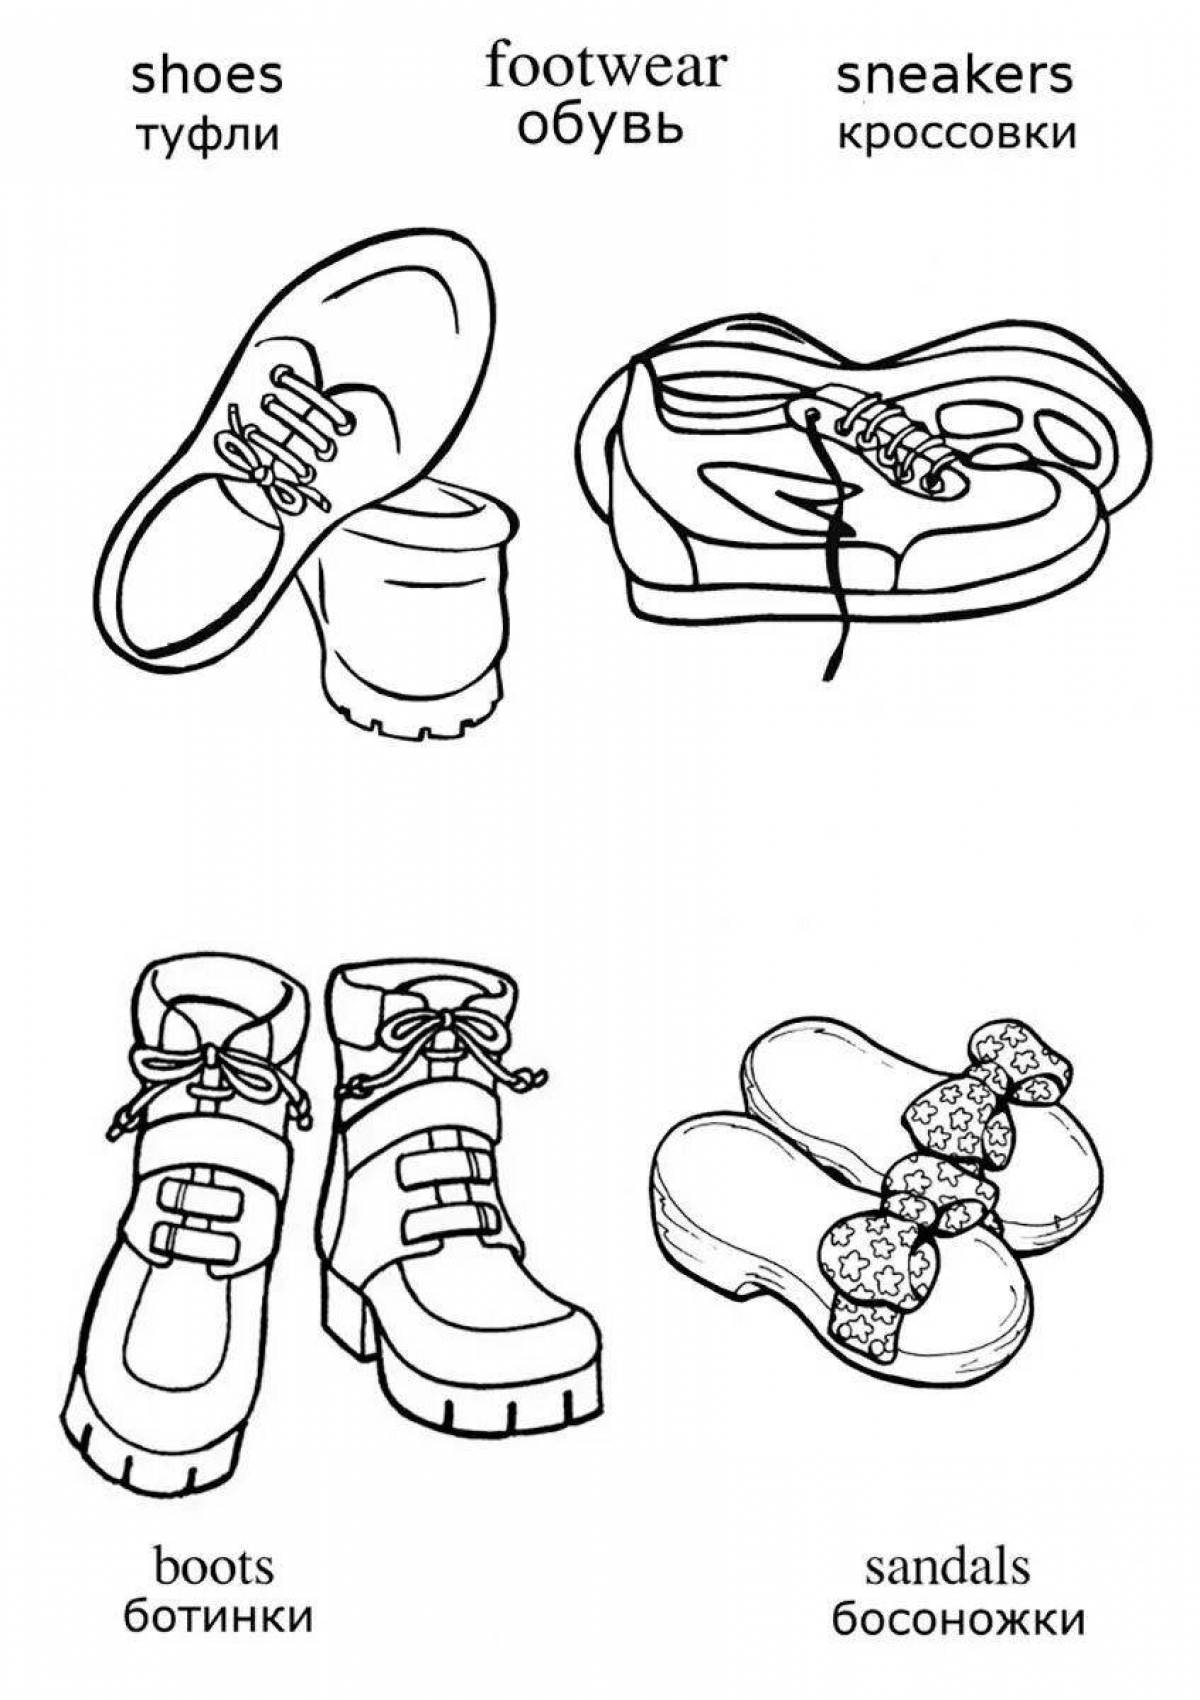 Coloring page funny shoes for children 2-3 years old